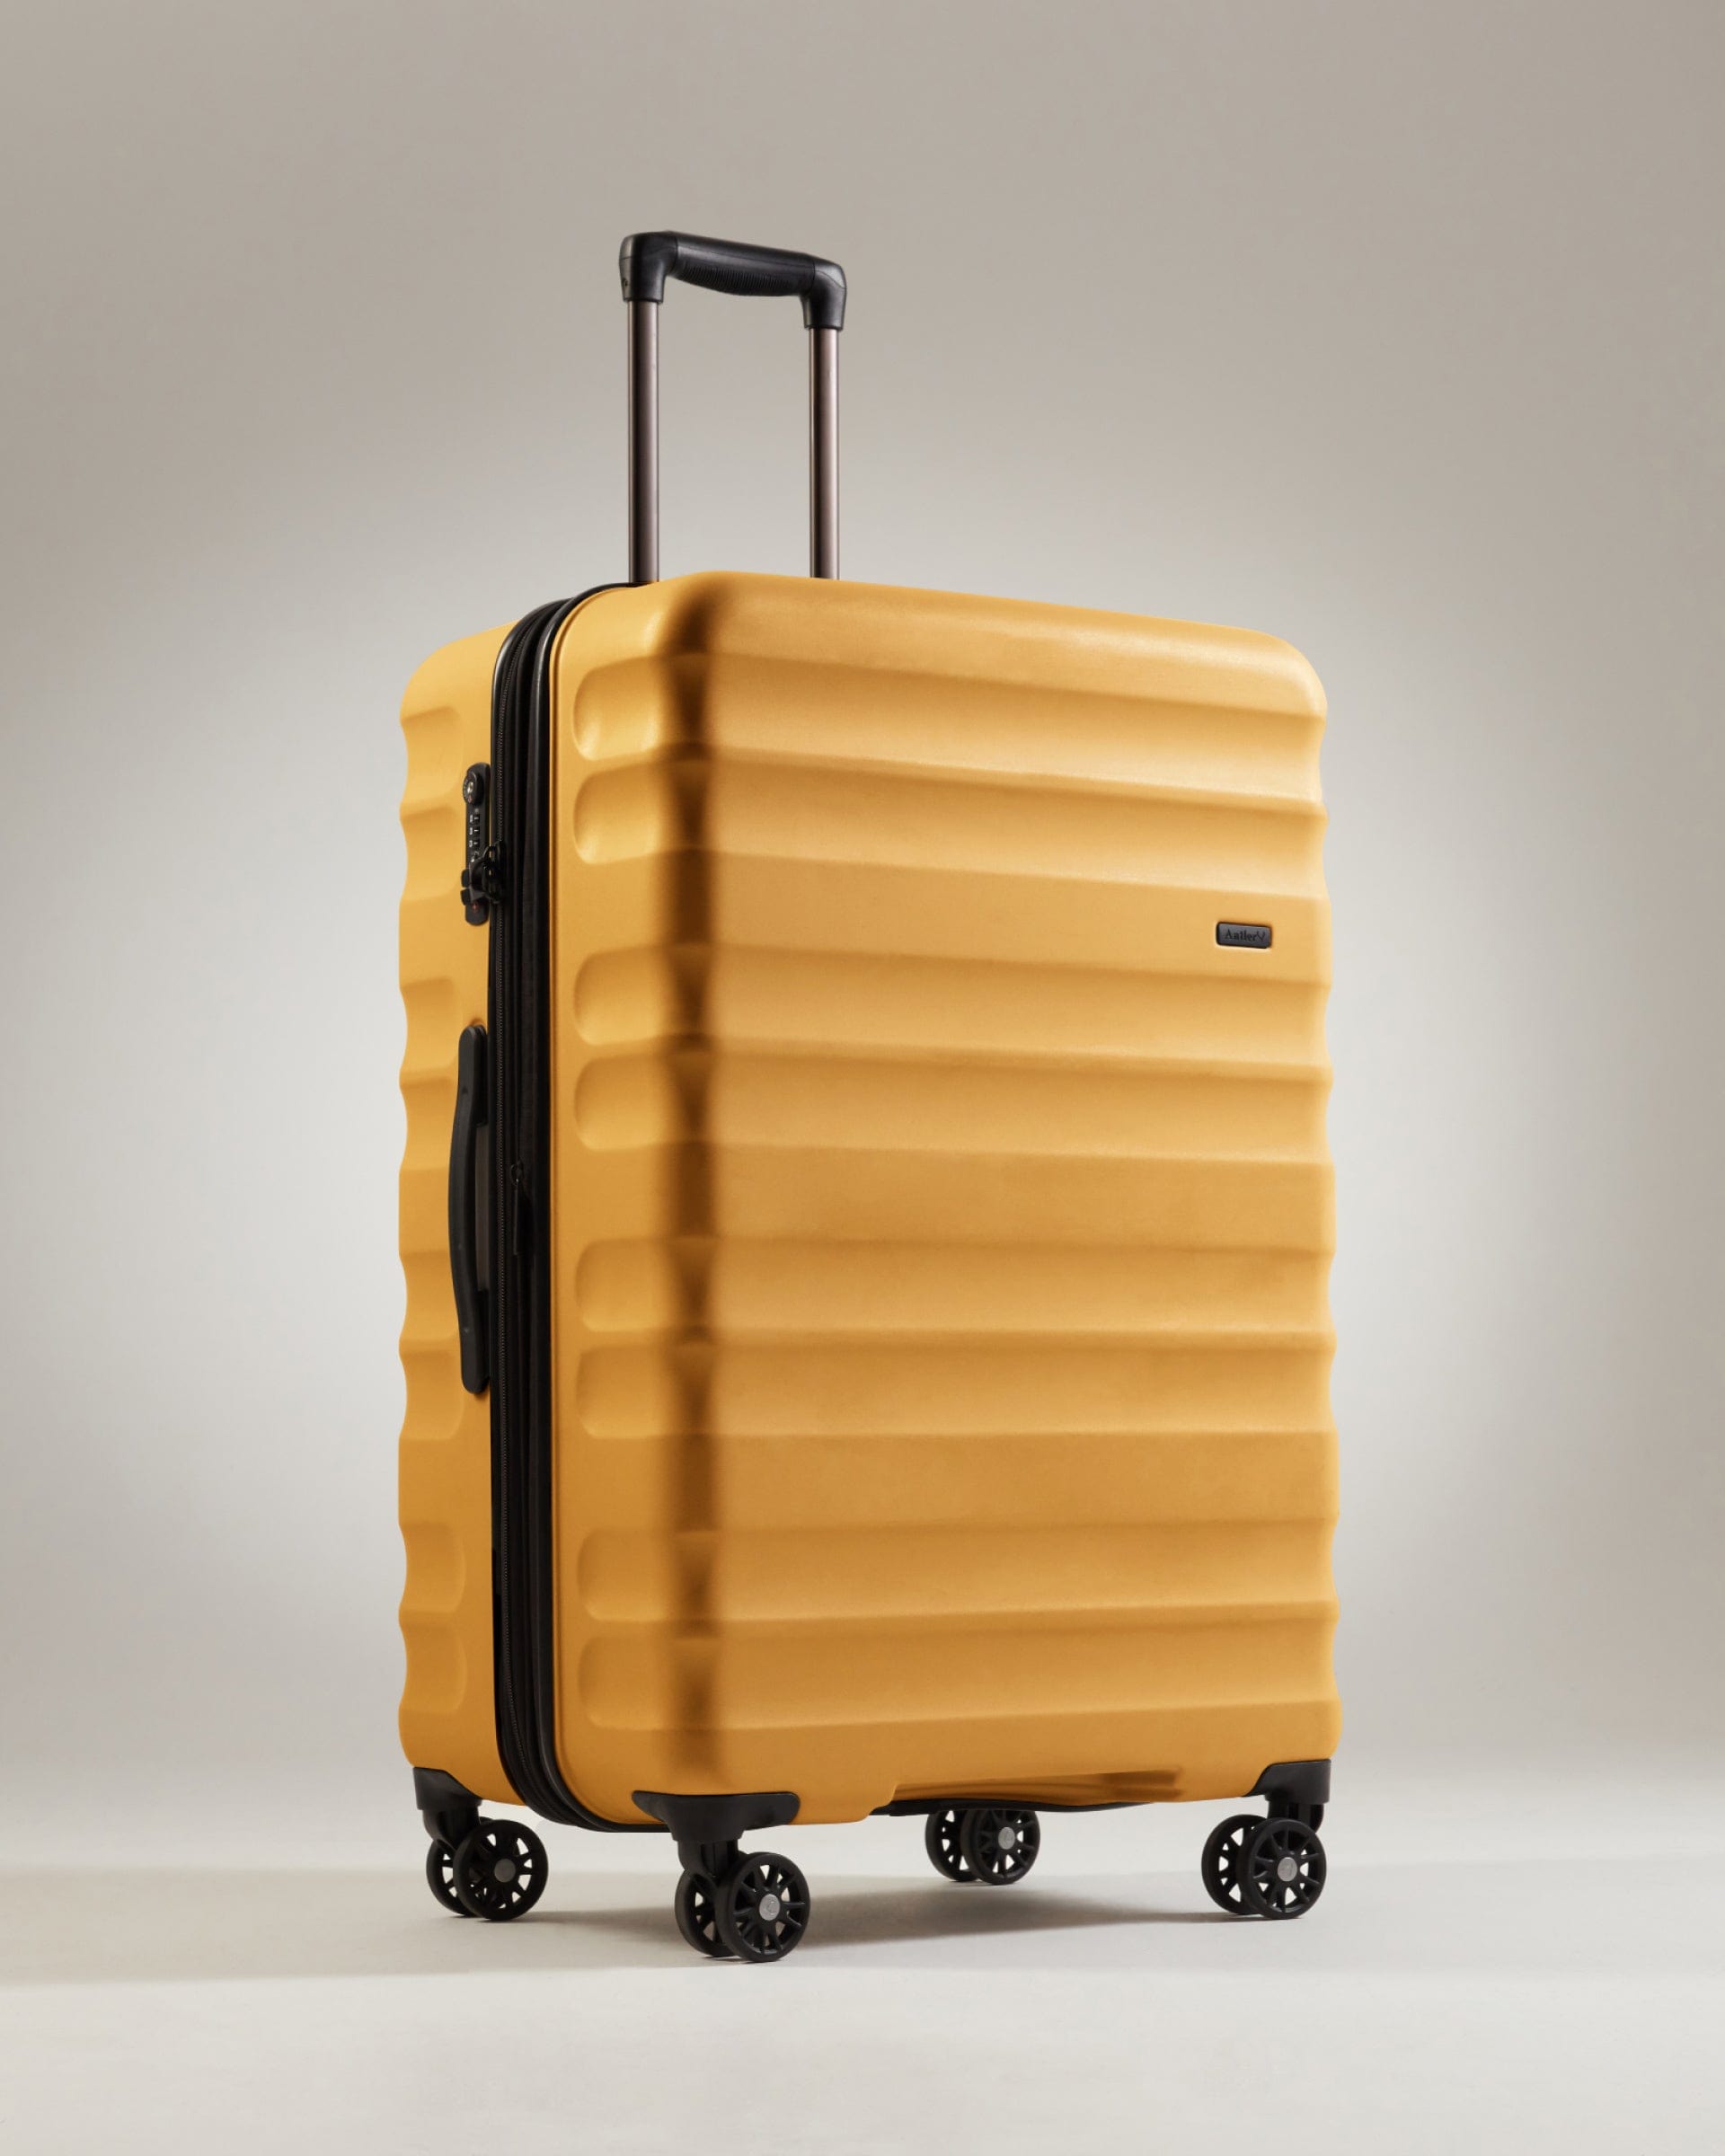 View Antler Clifton Large Suitcase In Ochre Size 35 x 52 x 80 cm information